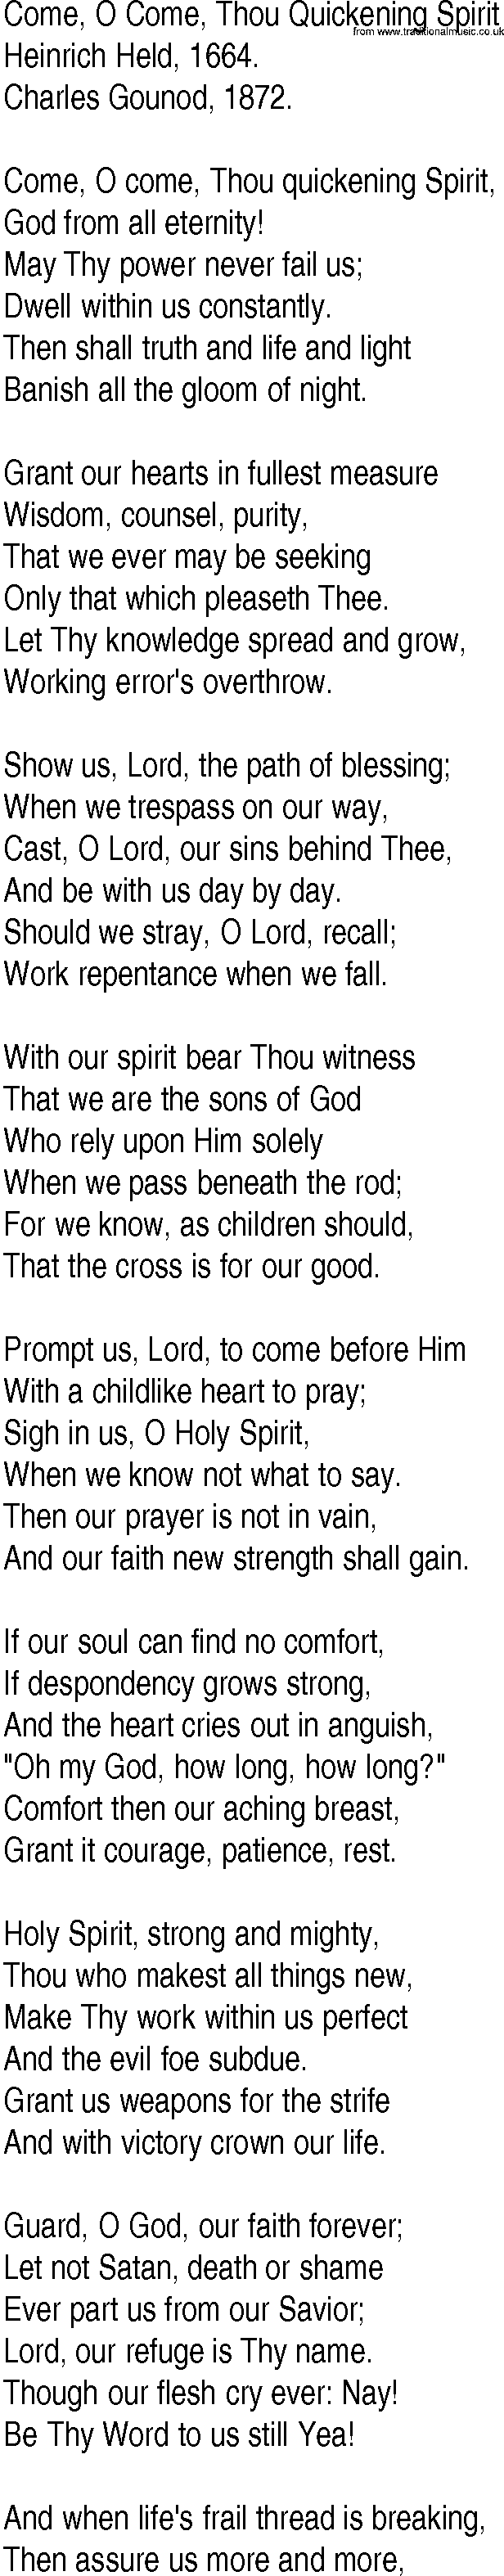 Hymn and Gospel Song: Come, O Come, Thou Quickening Spirit by Heinrich Held lyrics